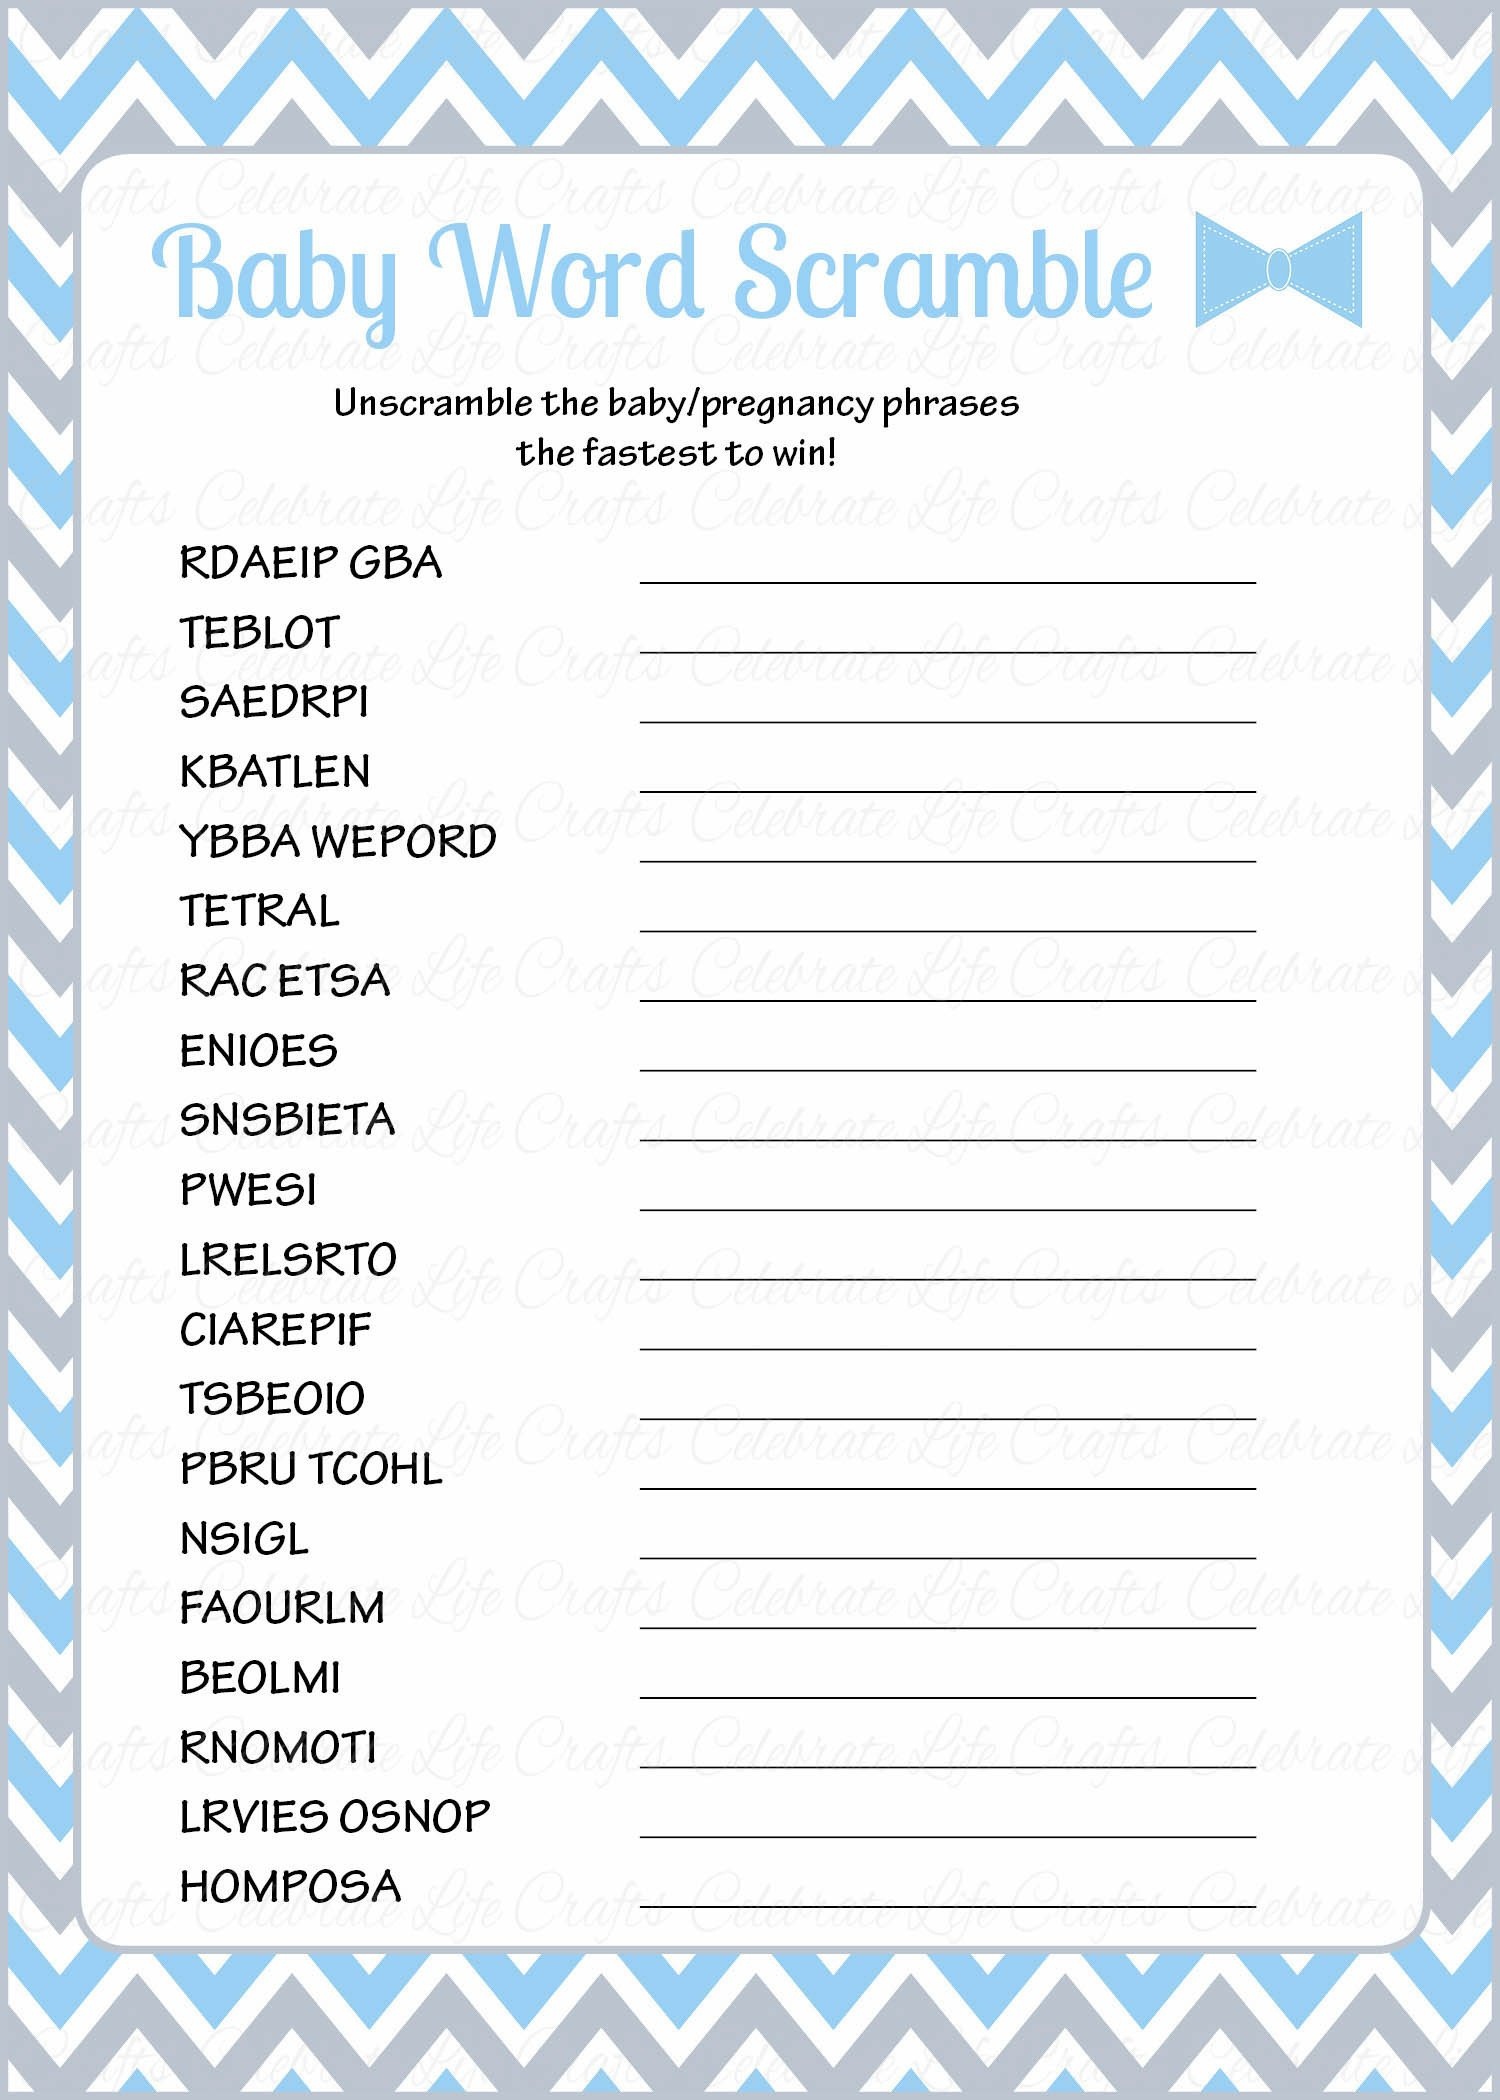 36 Adorable Baby Shower Word Scrambles | Kittybabylove - Unscramble Word Games Printable Free